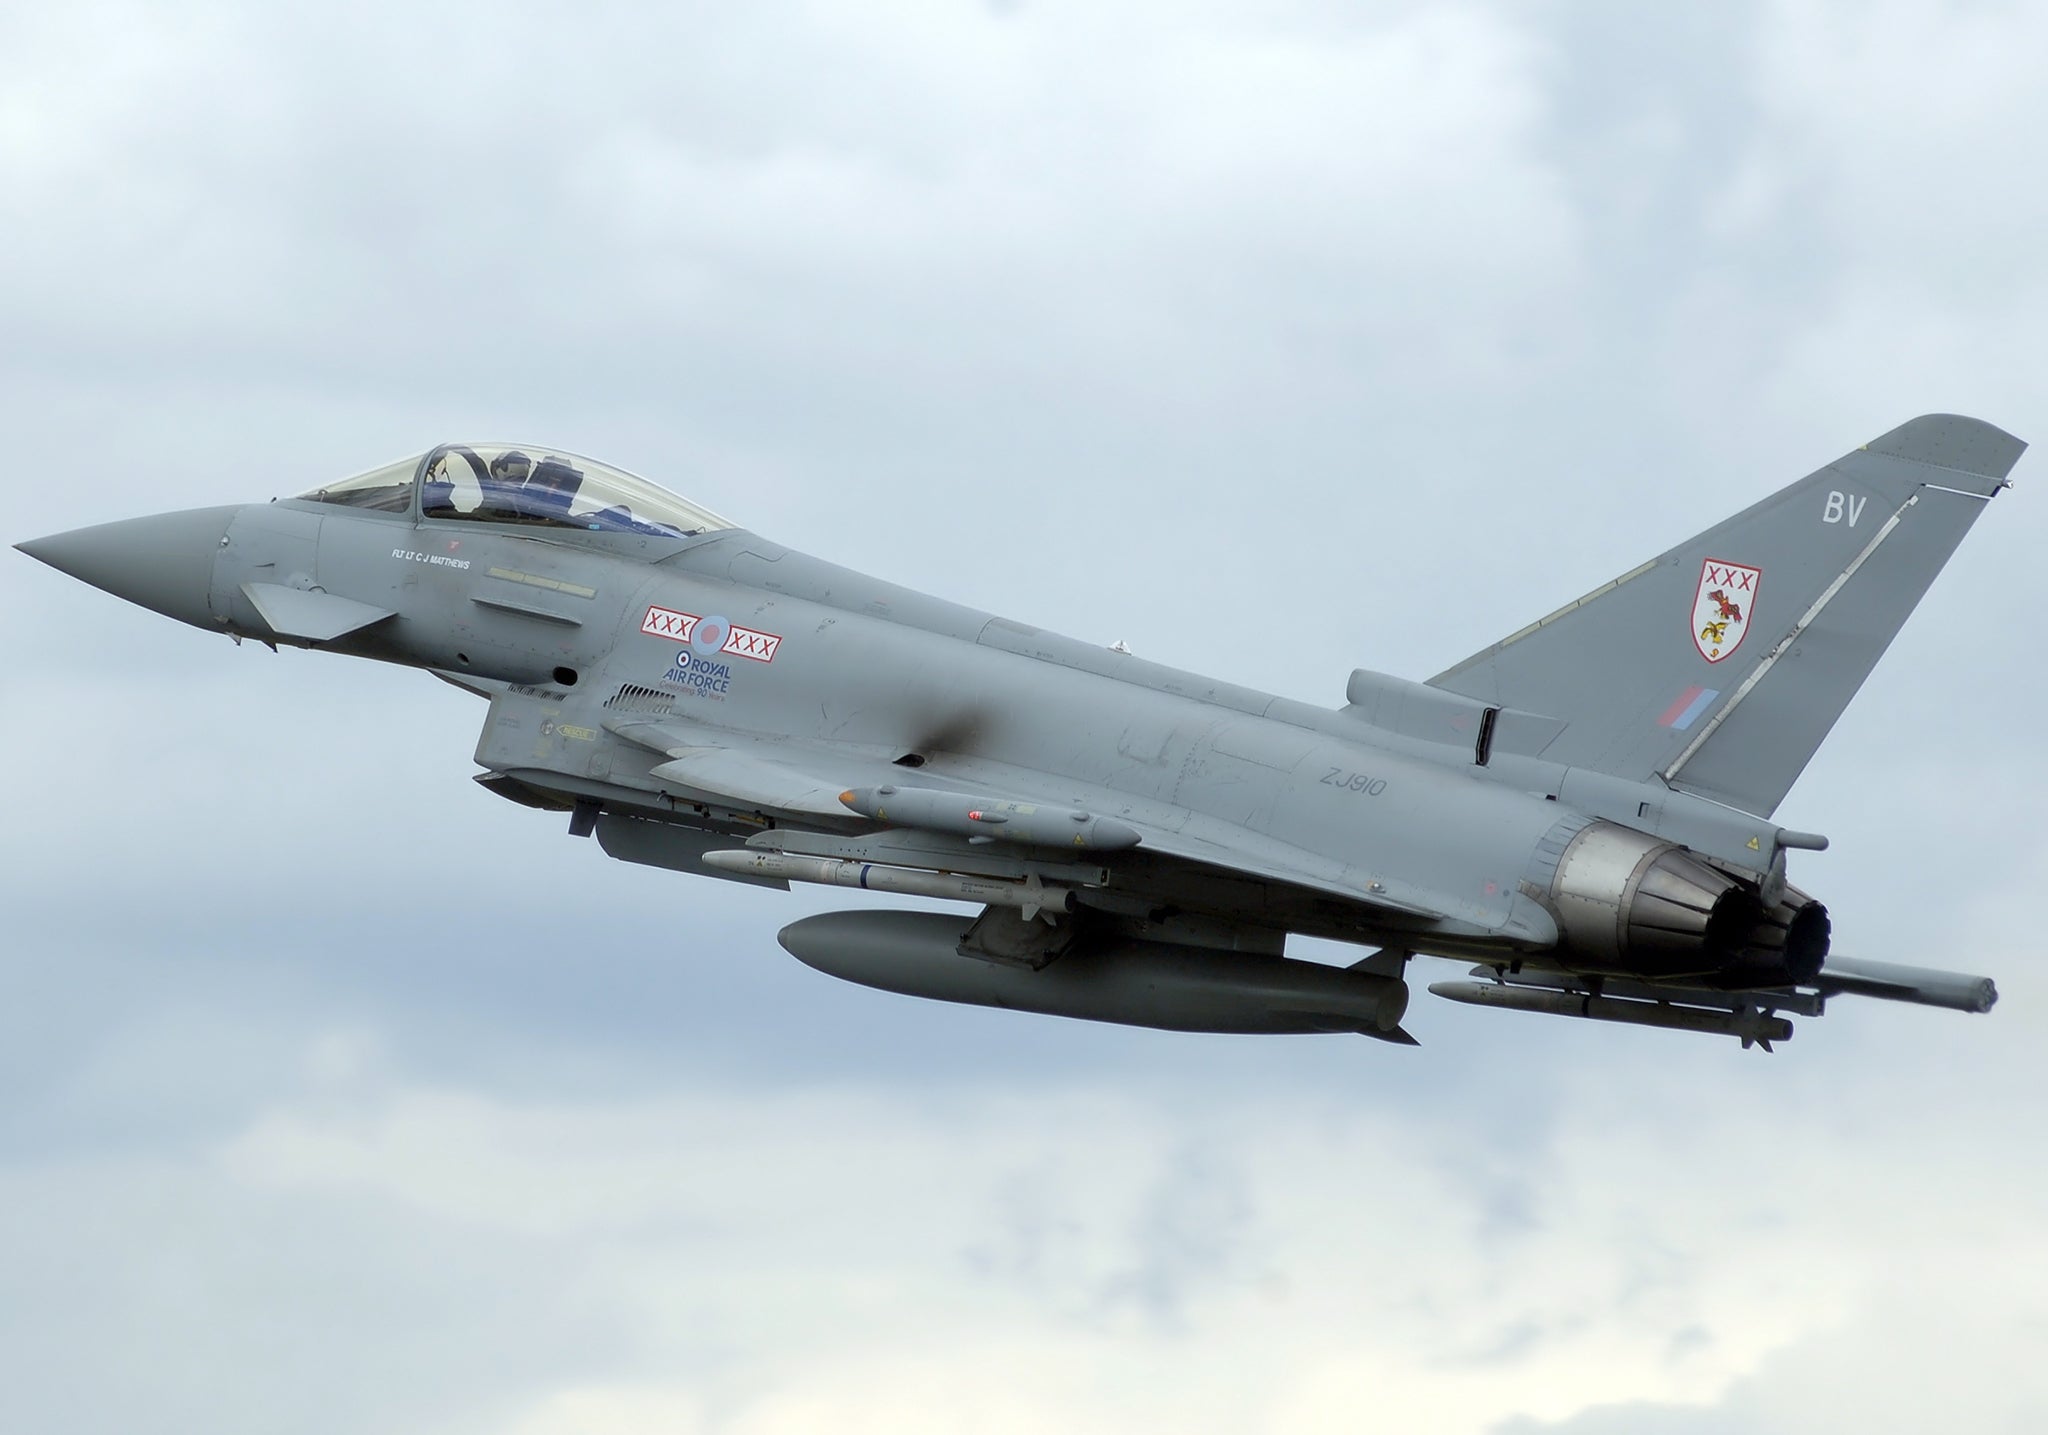 British Typhoon jets were sent to escort the Russian planes out of the area